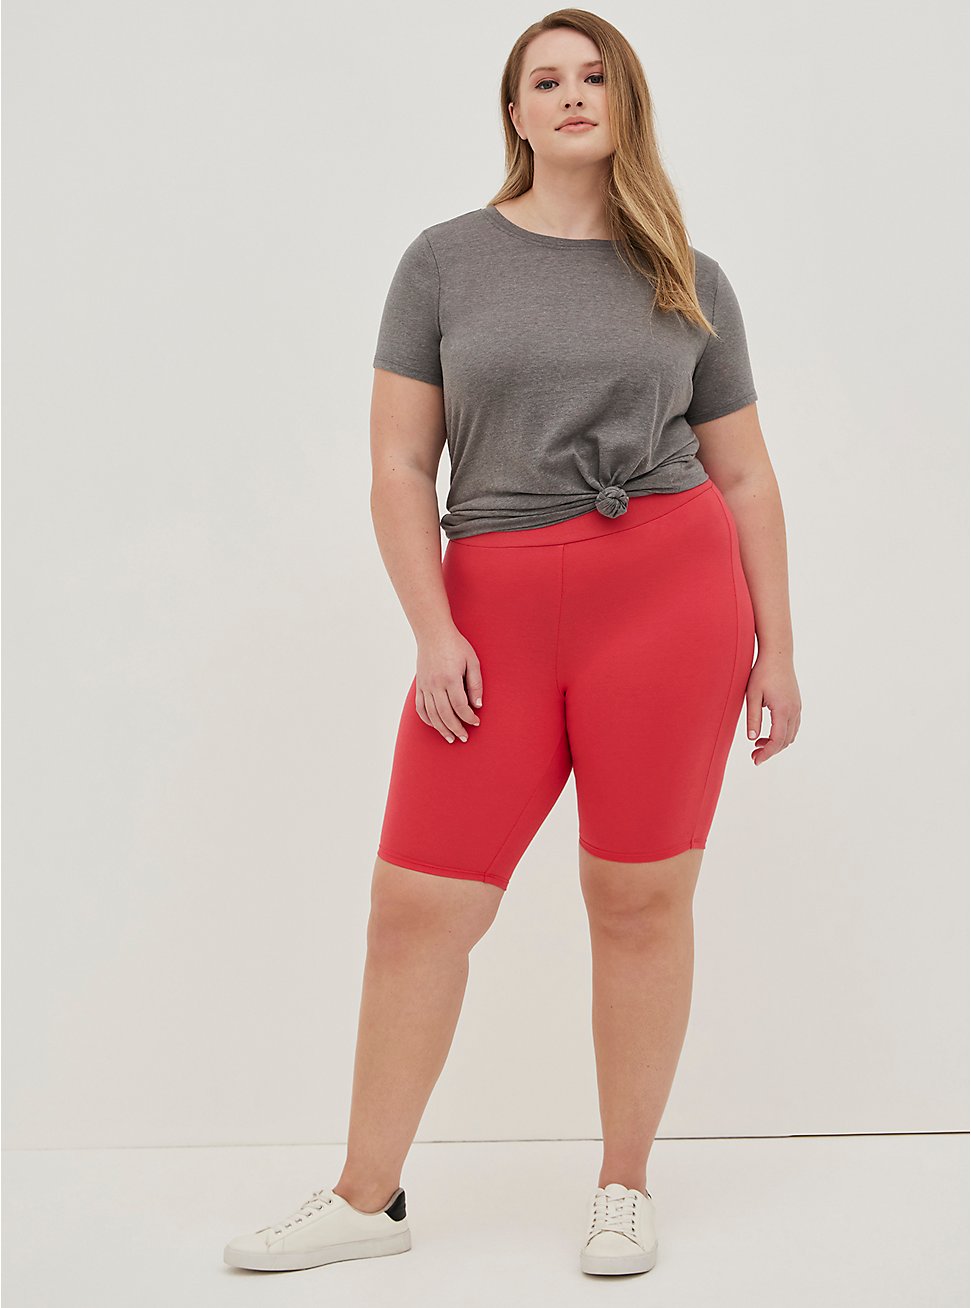 Plus Size Bike Short - Berry Red, RED, hi-res